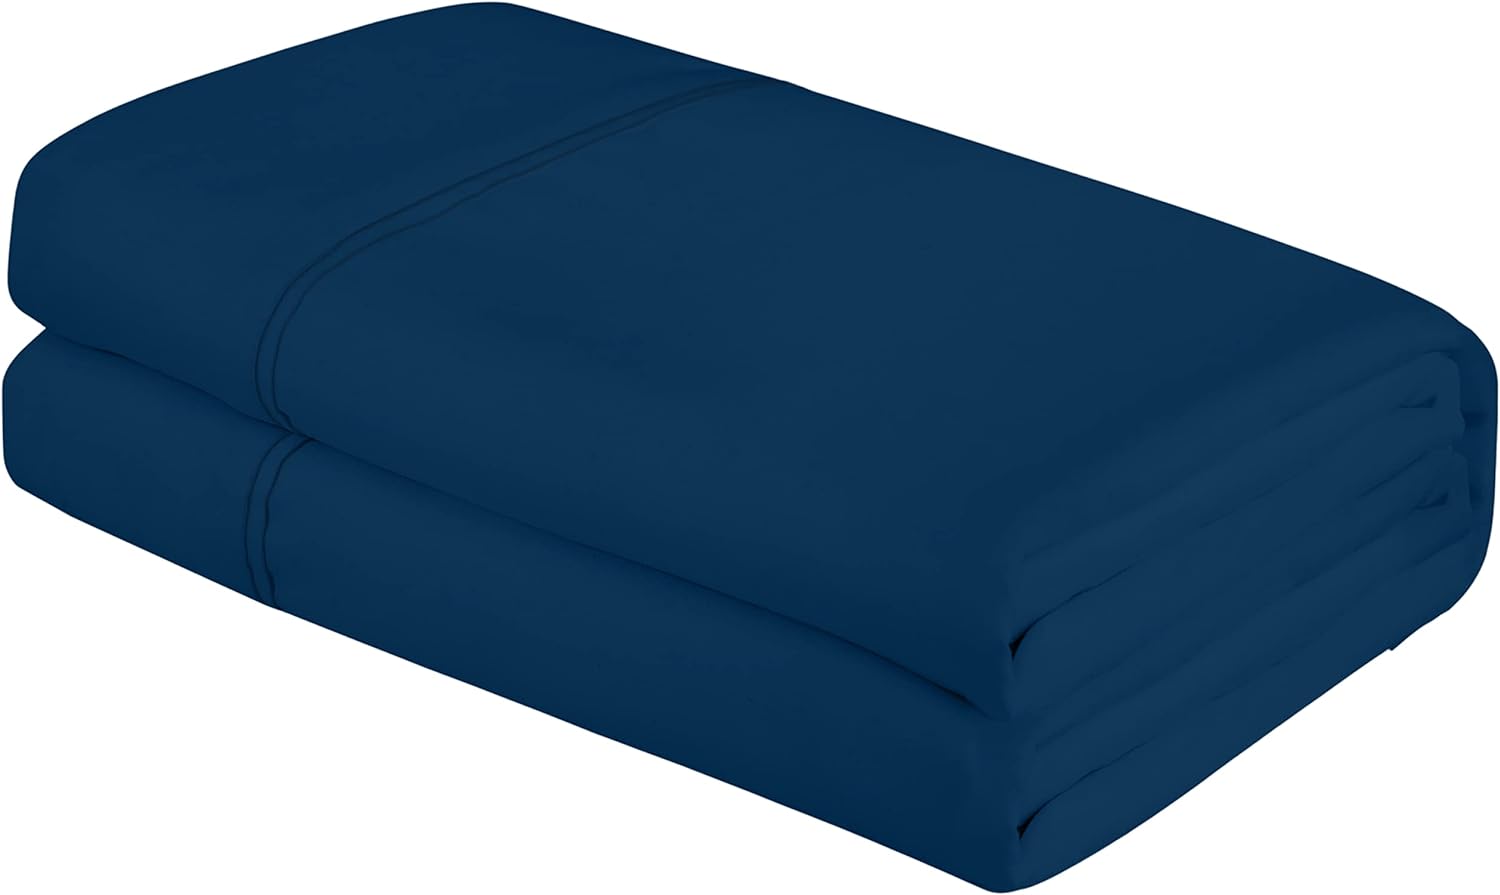 Royale Linens Full Size Flat Sheet Only - Brushed 1800 Microfiber - Ultra Soft & Breathable - Wrinkle & Stain Resistant - Hotel Quality Flat Sheet Sold Separately - Top Sheet for Bed - (Full, Navy)